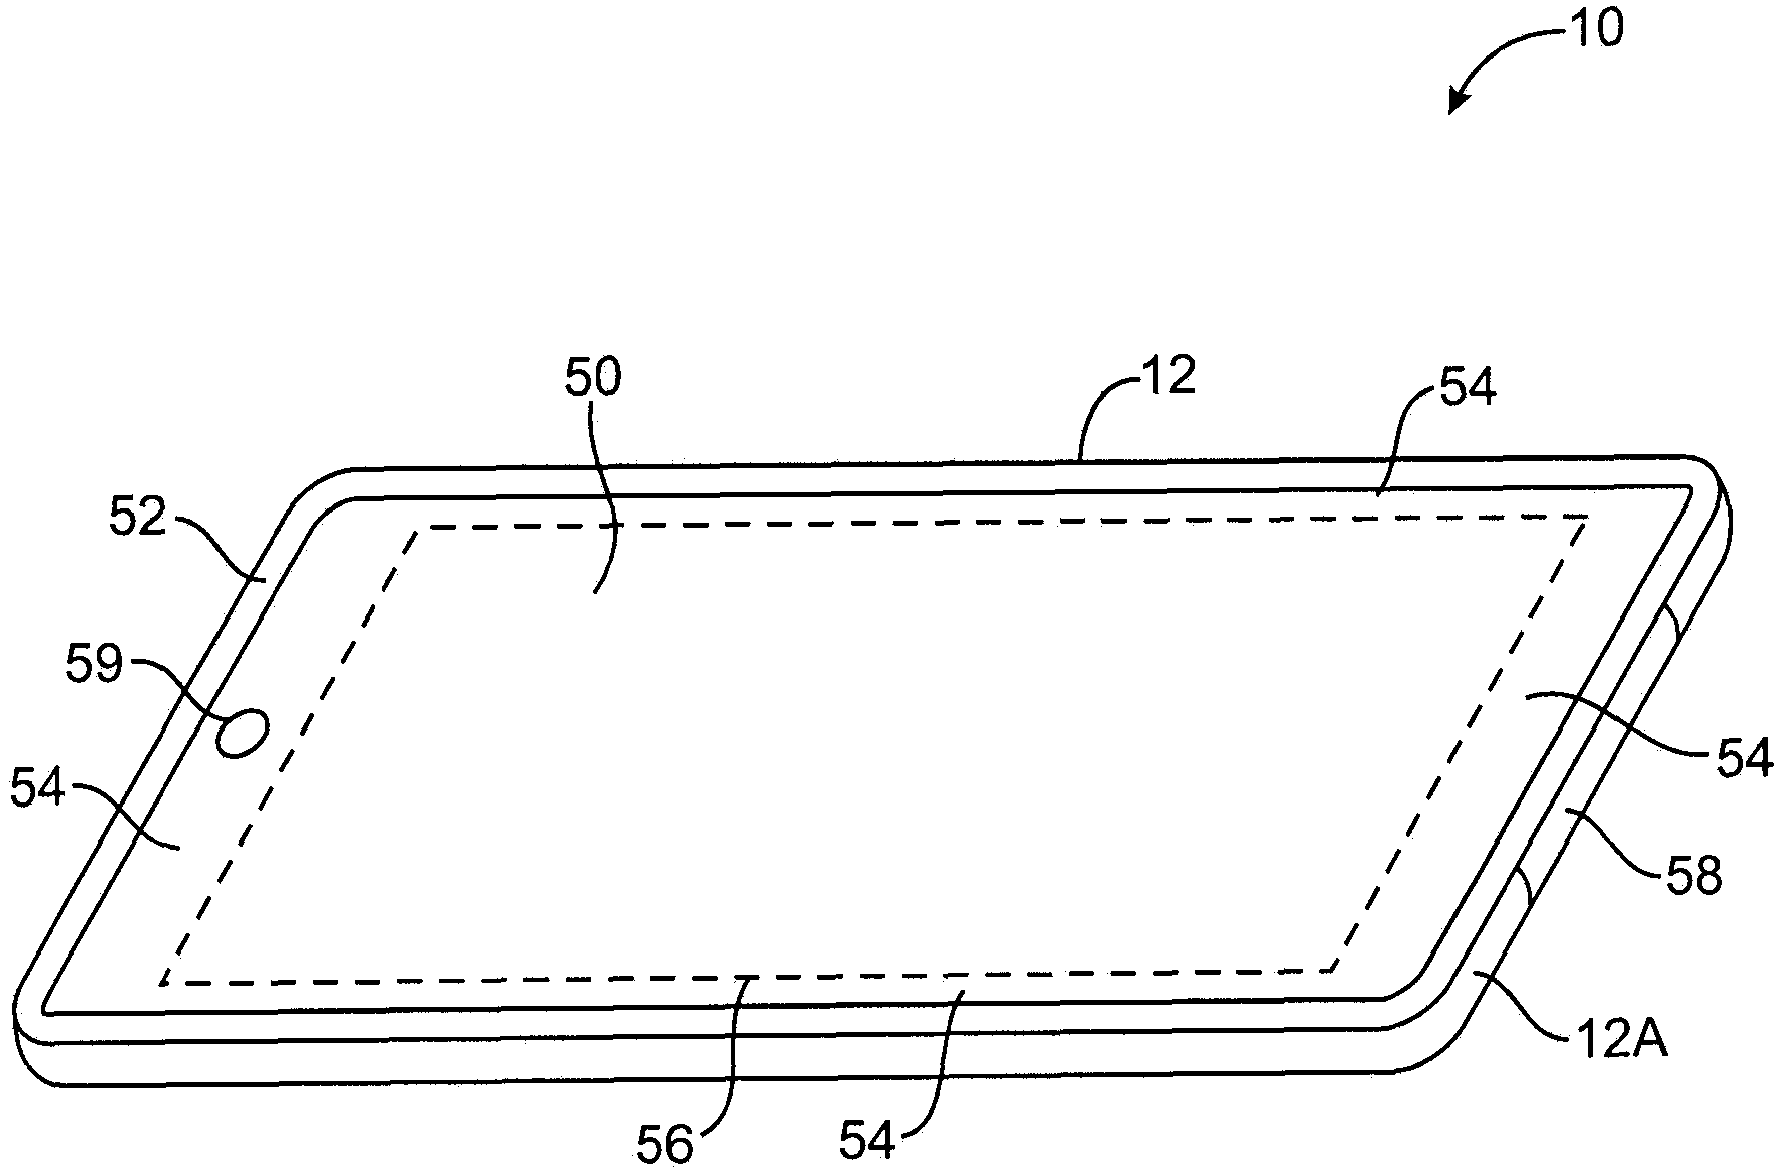 Electronic devices with capacitive proximity sensors